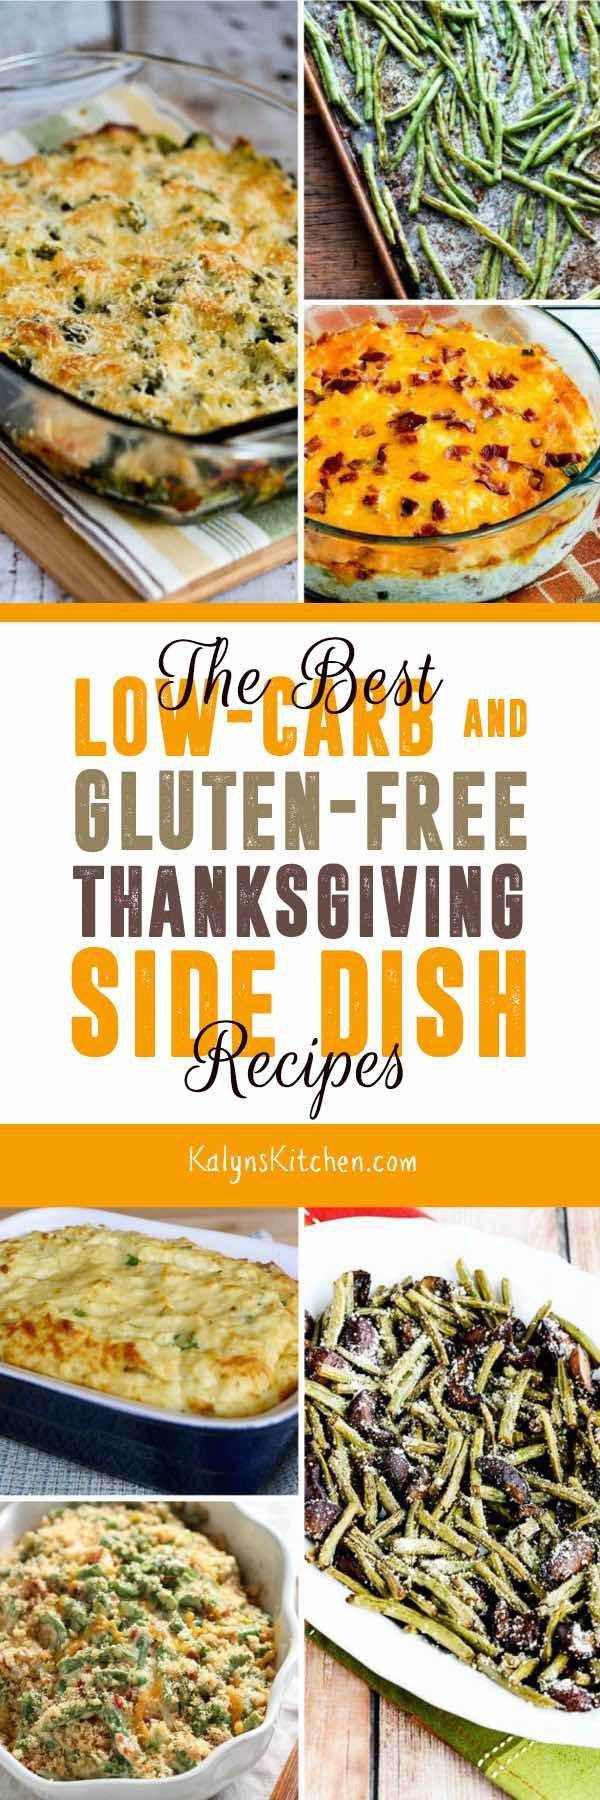 Gluten And Dairy Free Side Dishes
 The BEST Low Carb and Gluten Free Thanksgiving Side Dish